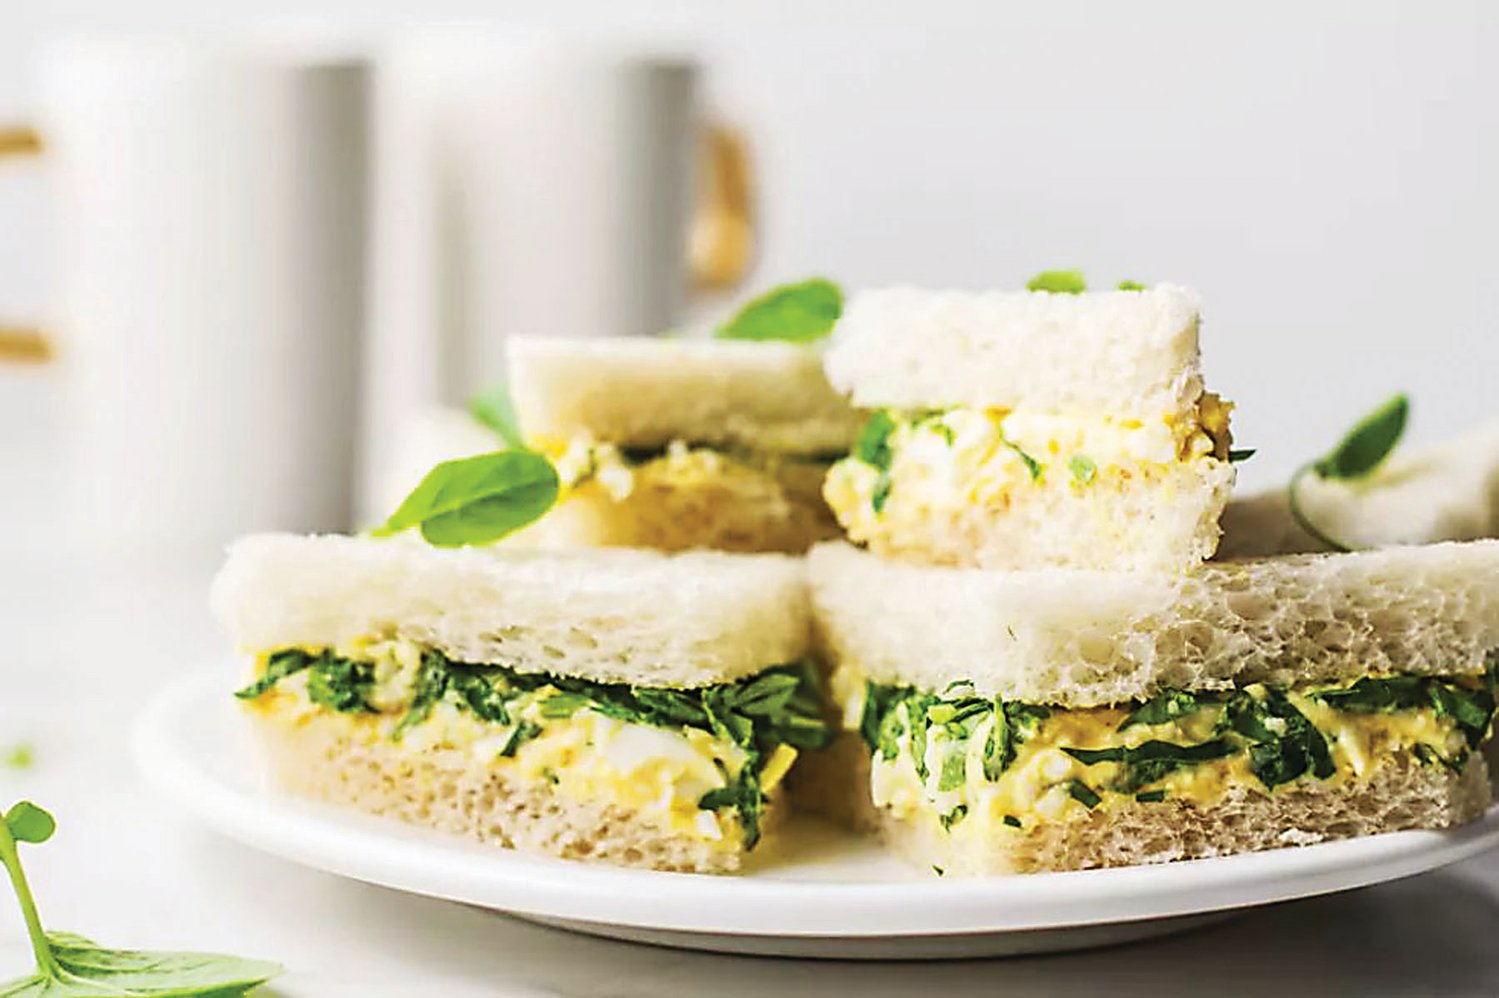 Tiny sandwiches are a must when preparing a formal tea. These are egg with watercress but you can make anything you like when you create your own tea.